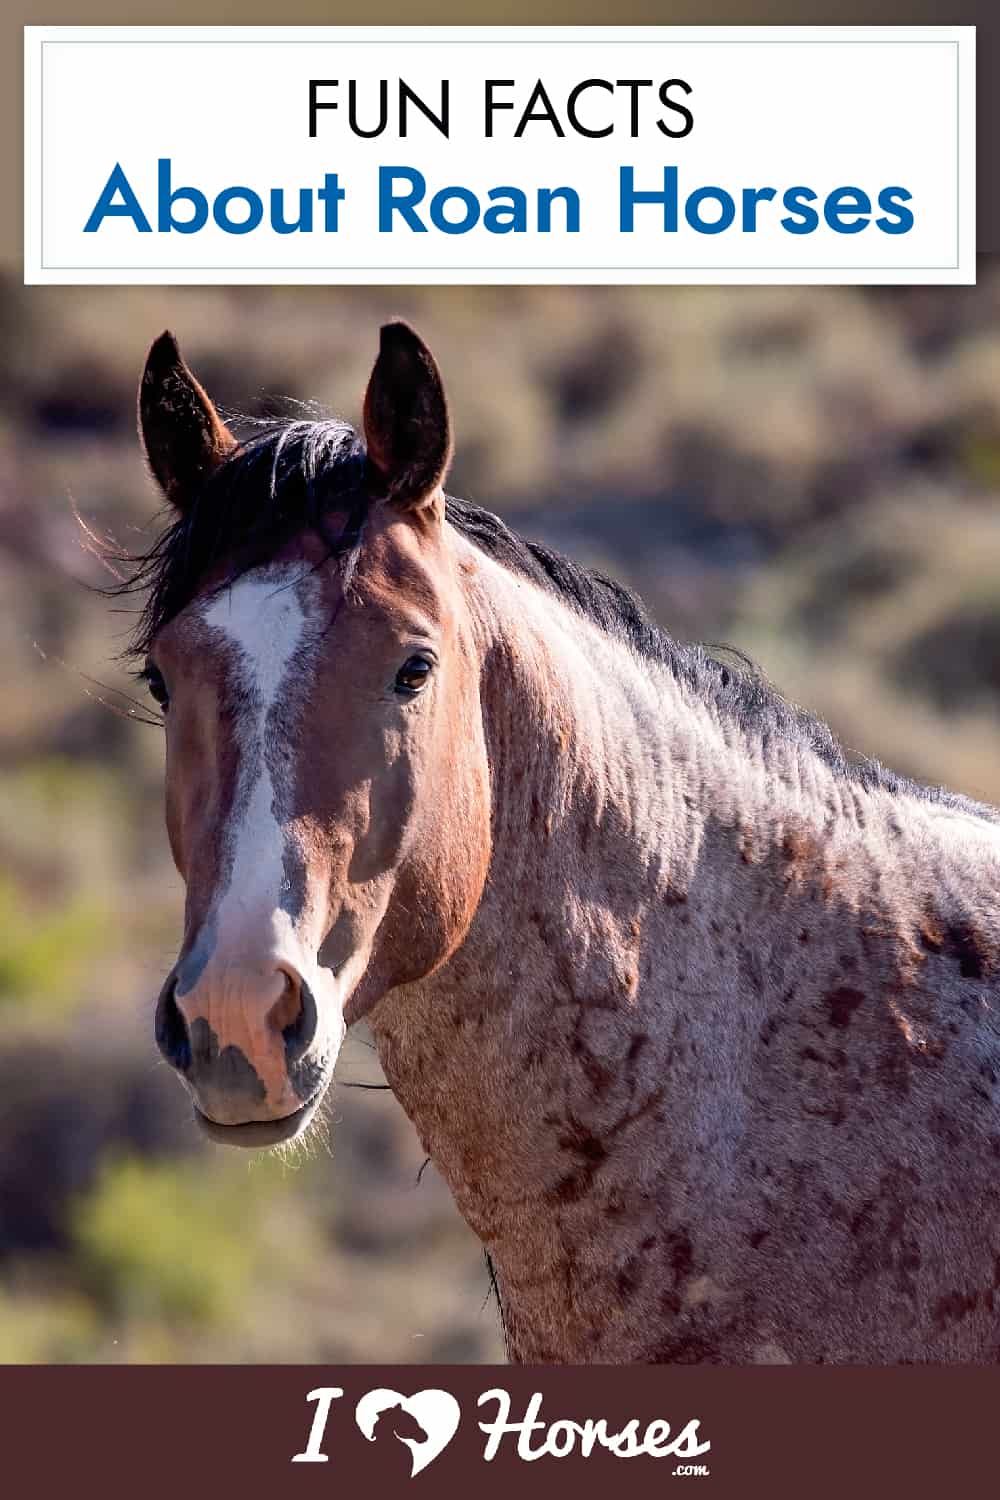 Fun Facts About Roan Horses-01